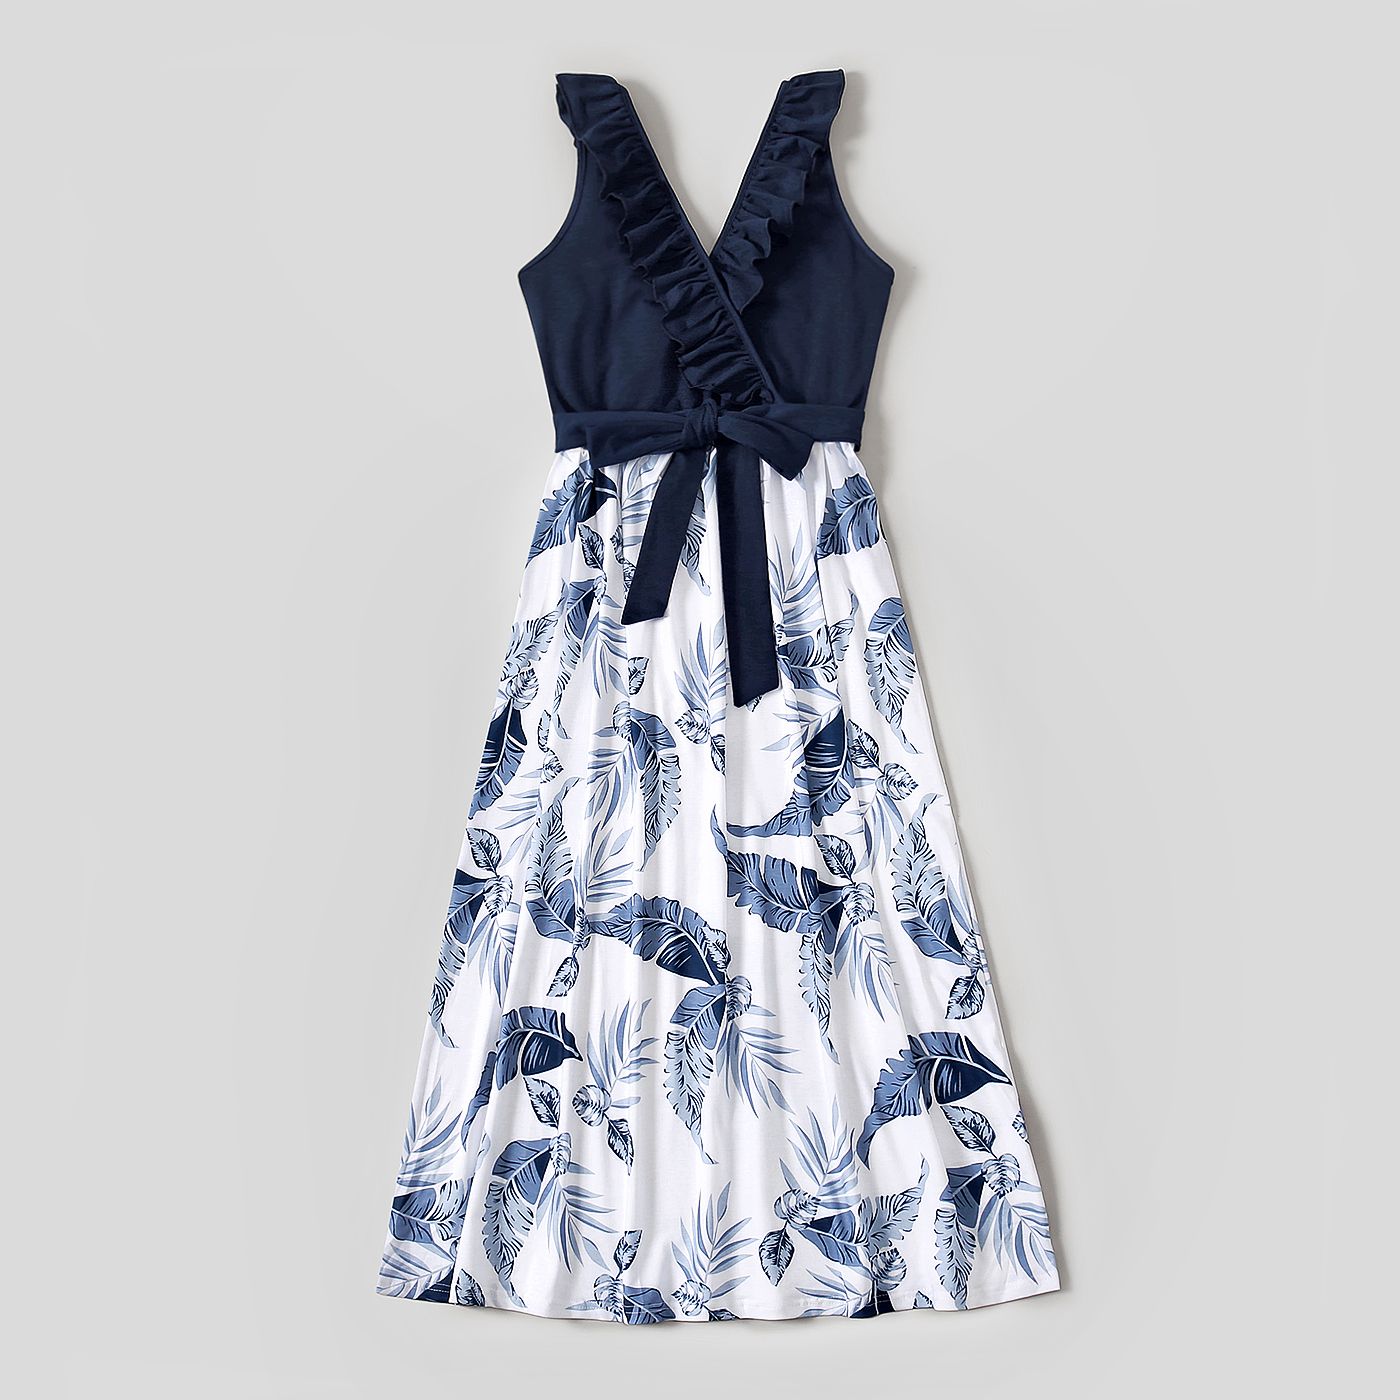 Family Matching Solid V Neck Ruffle Sleeveless Splicing Palm Leaf Print Dresses and Short-sleeve T-s